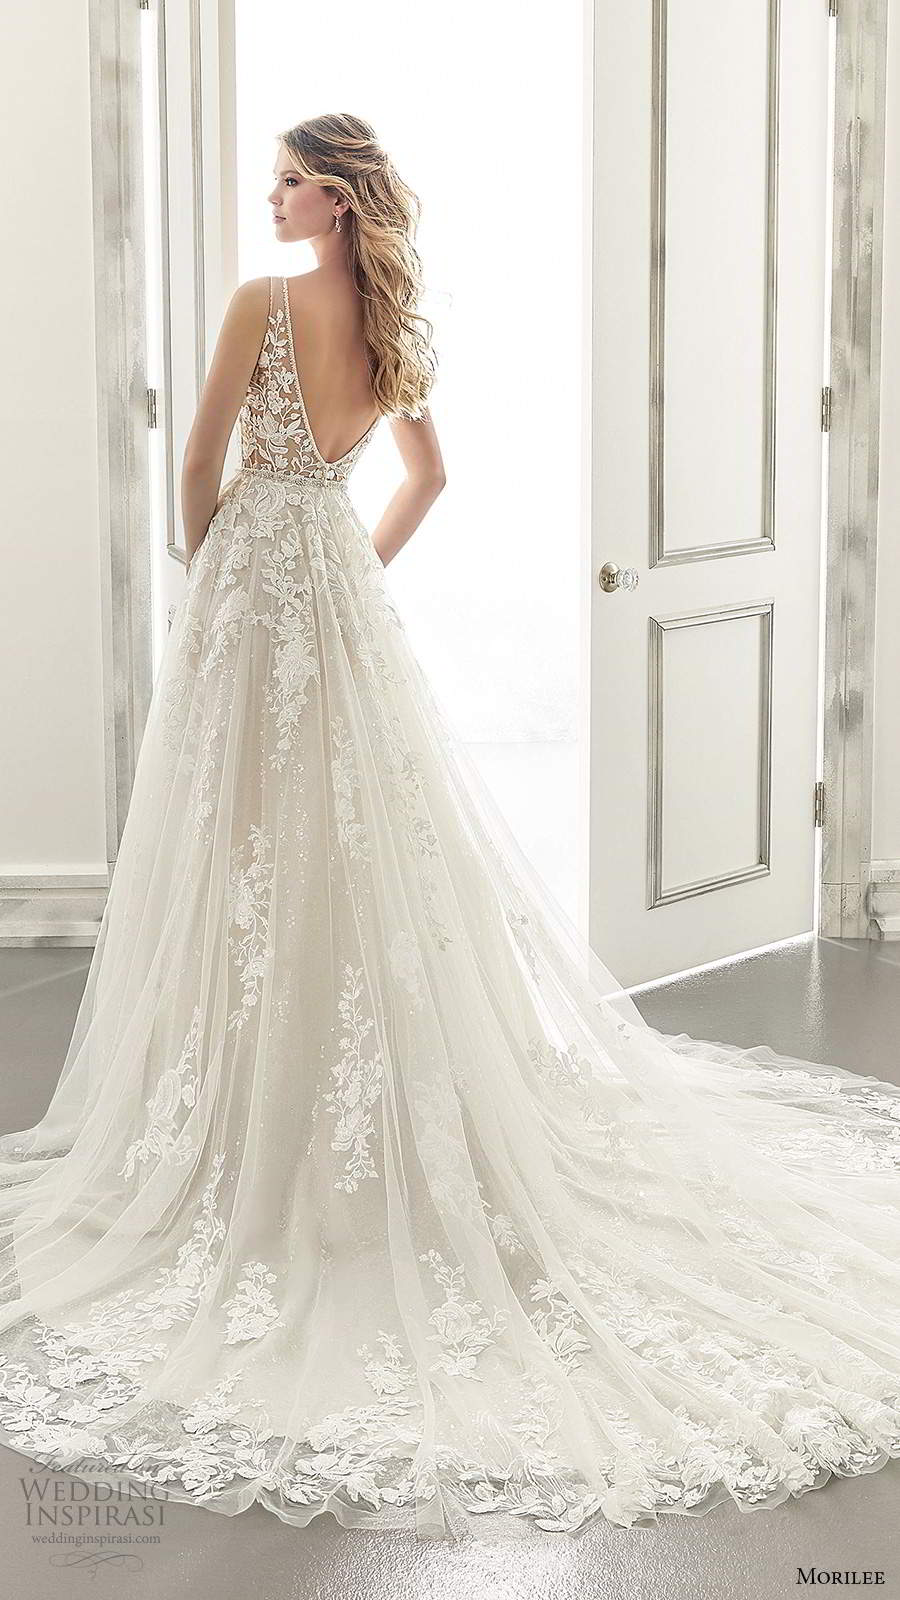 morilee spring 2021 bridal sleeveless illusion straps plunging v neckline fully embellished a line ball gown wedding dress chapel train (4) bv